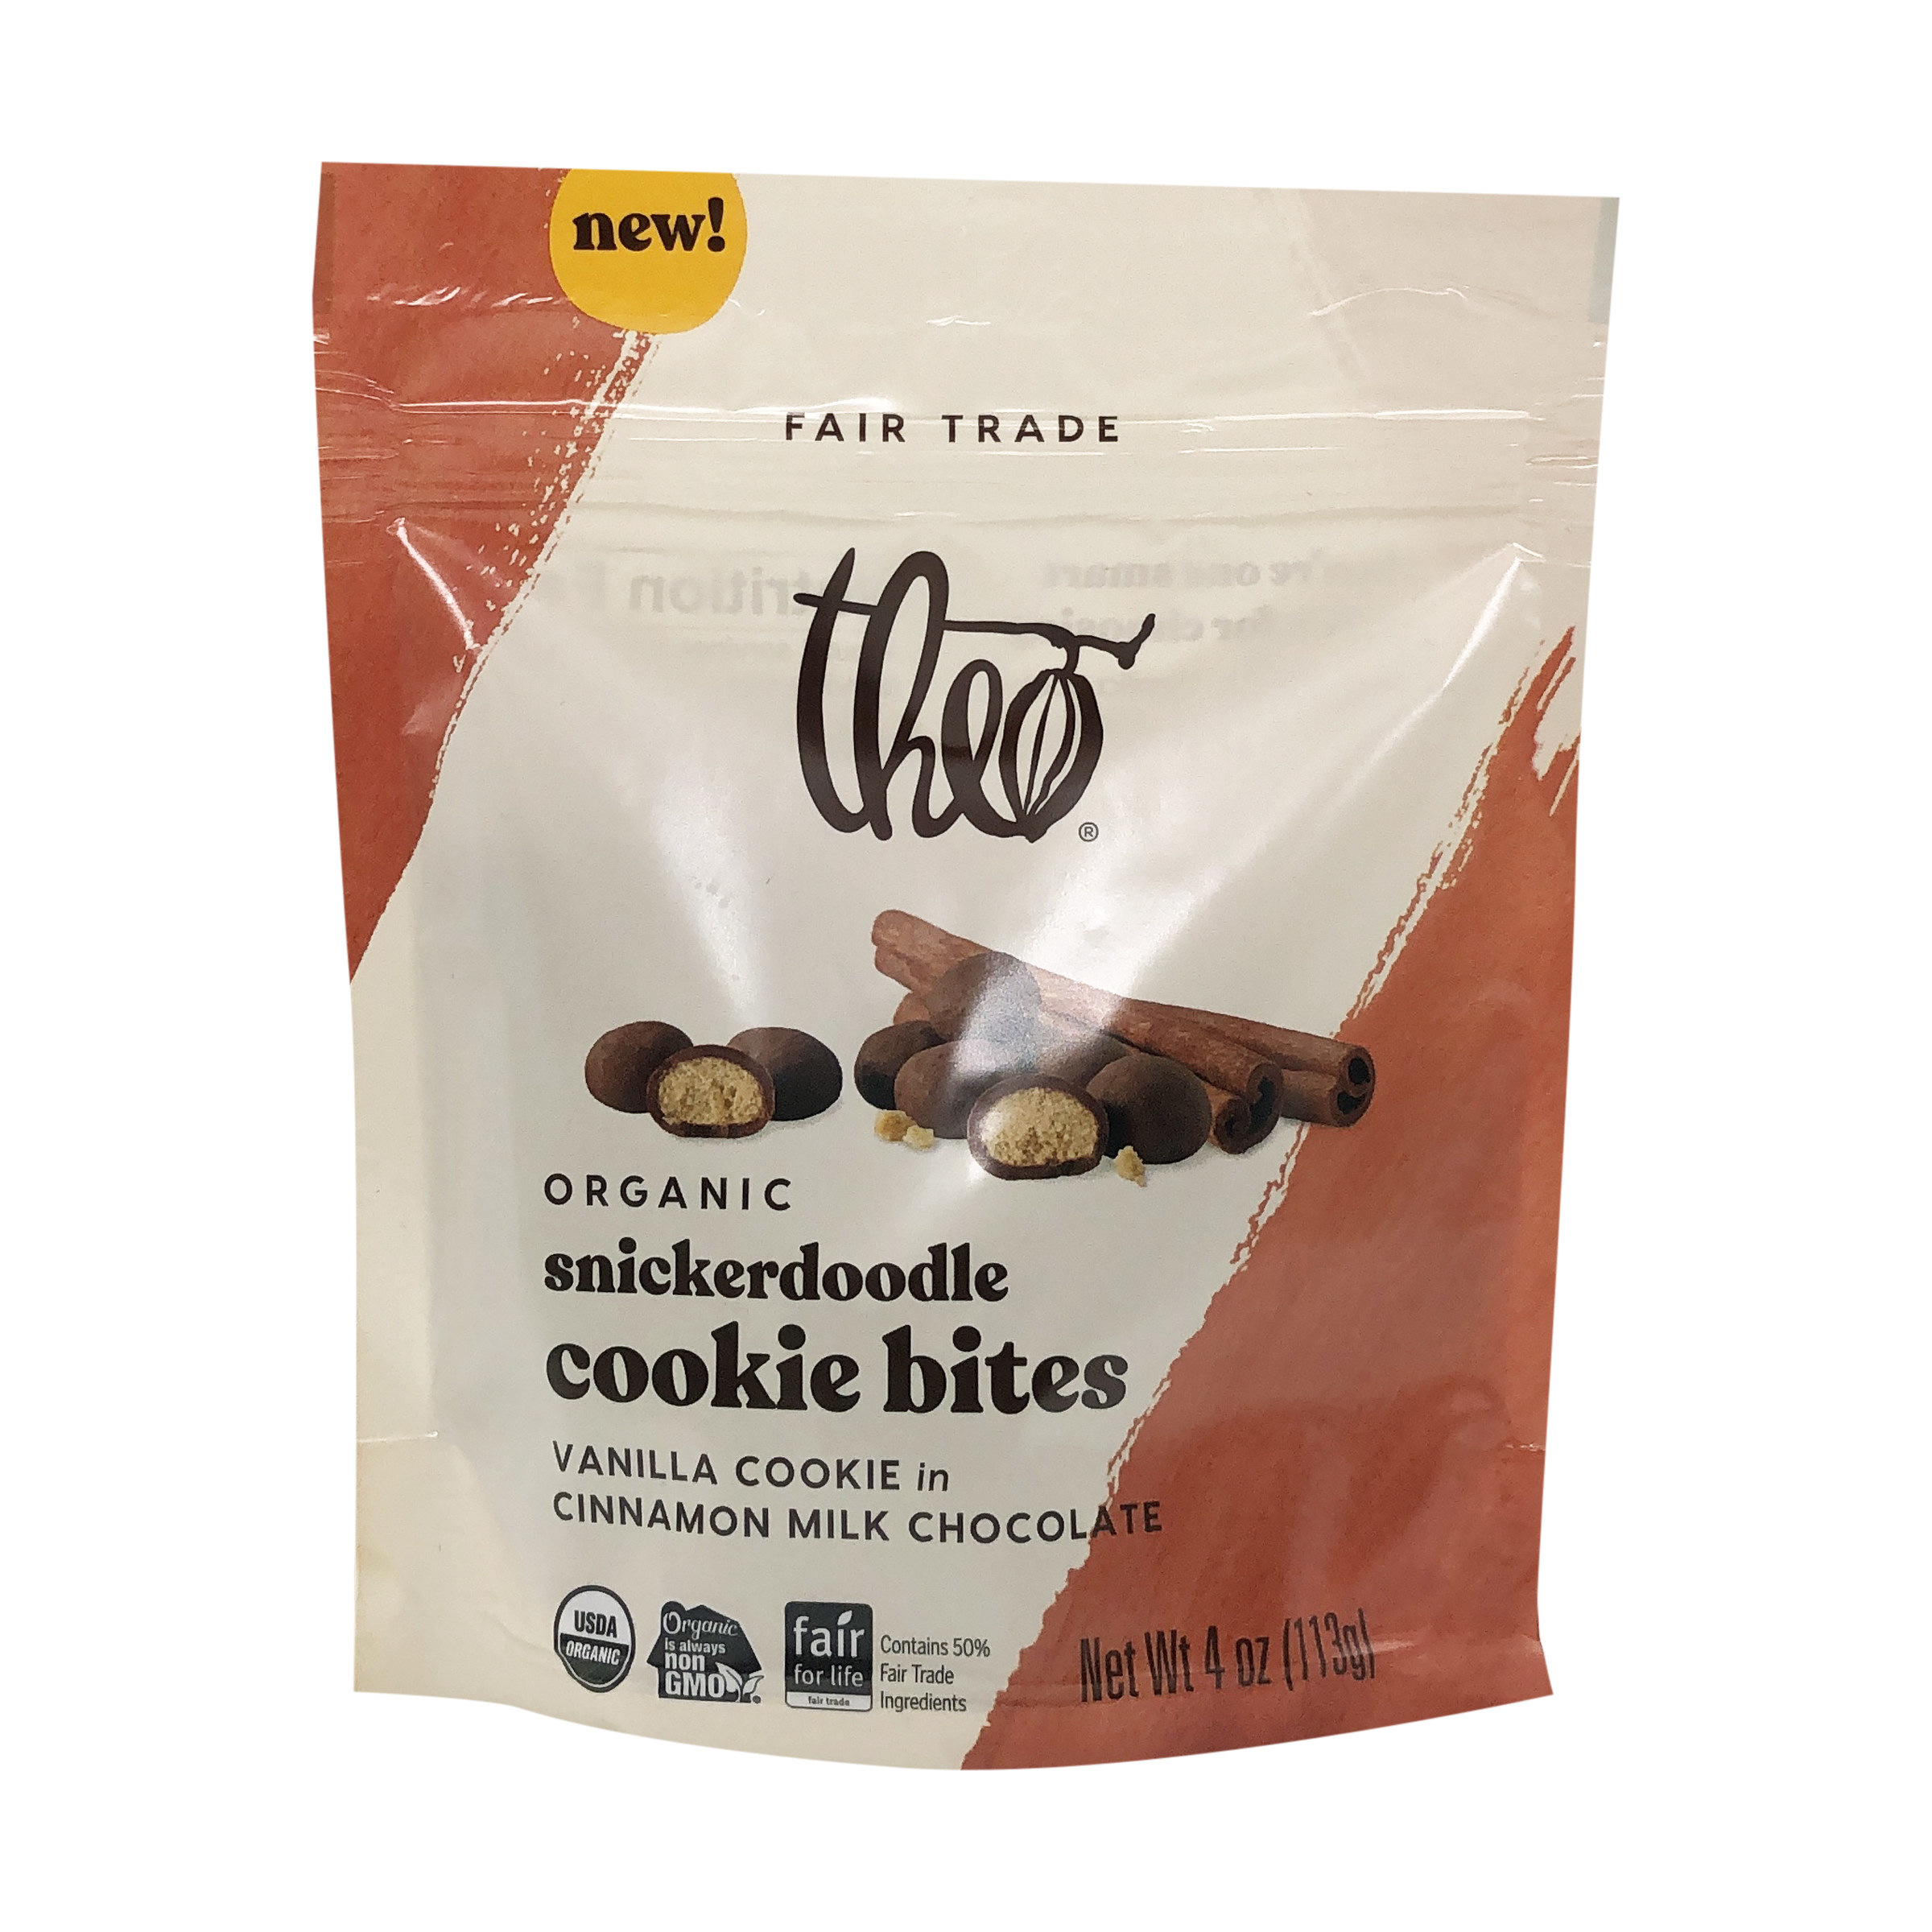 an eight inch tall plastic bag with a resealable zipper that says &quot;theo organic snickerdoodle chocolate cookie bites&quot; with pictures of m&amp;m-sized chocolate covered cookies